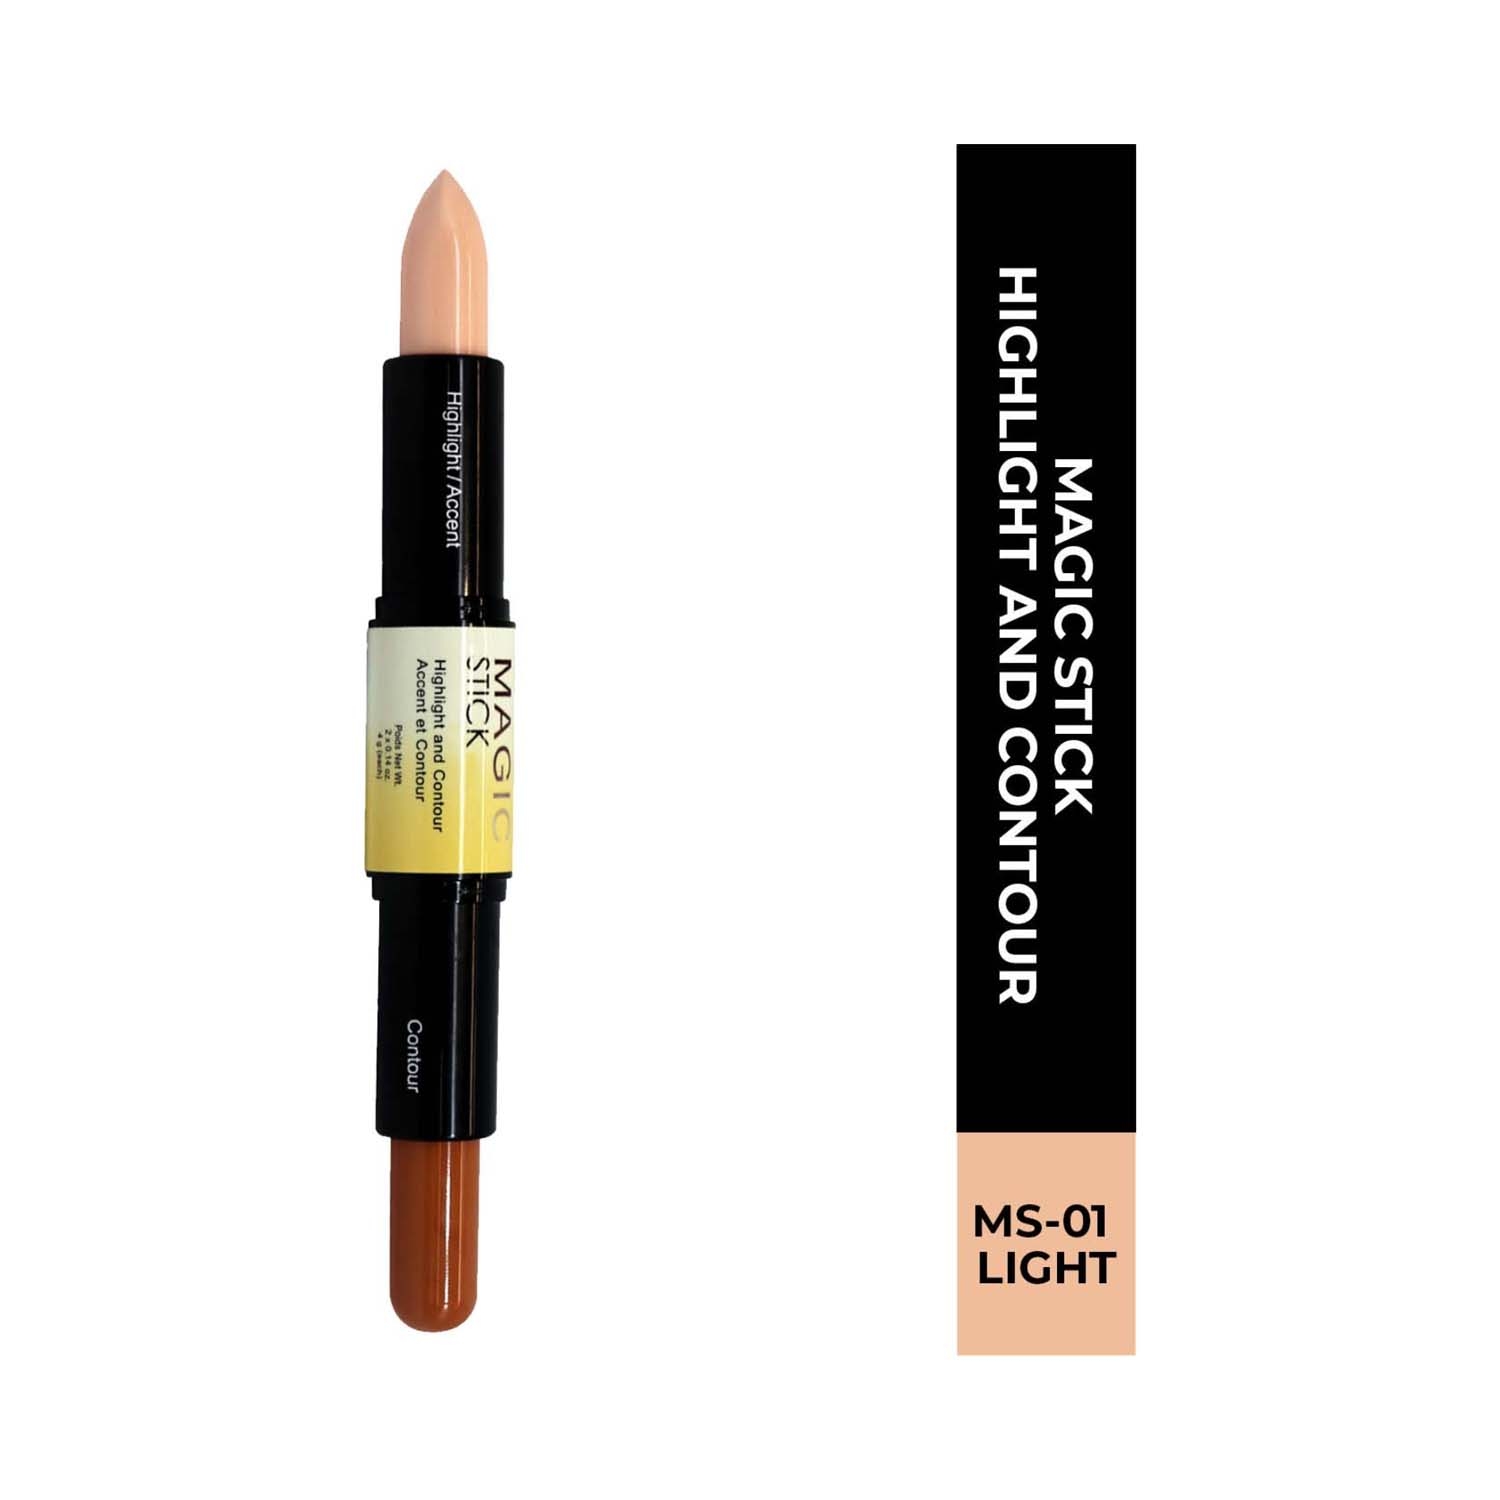 Half N Half | Half N Half 2-In-1 Cover Perfection Highlight And Contour Magic Stick - 01 Light (8g)